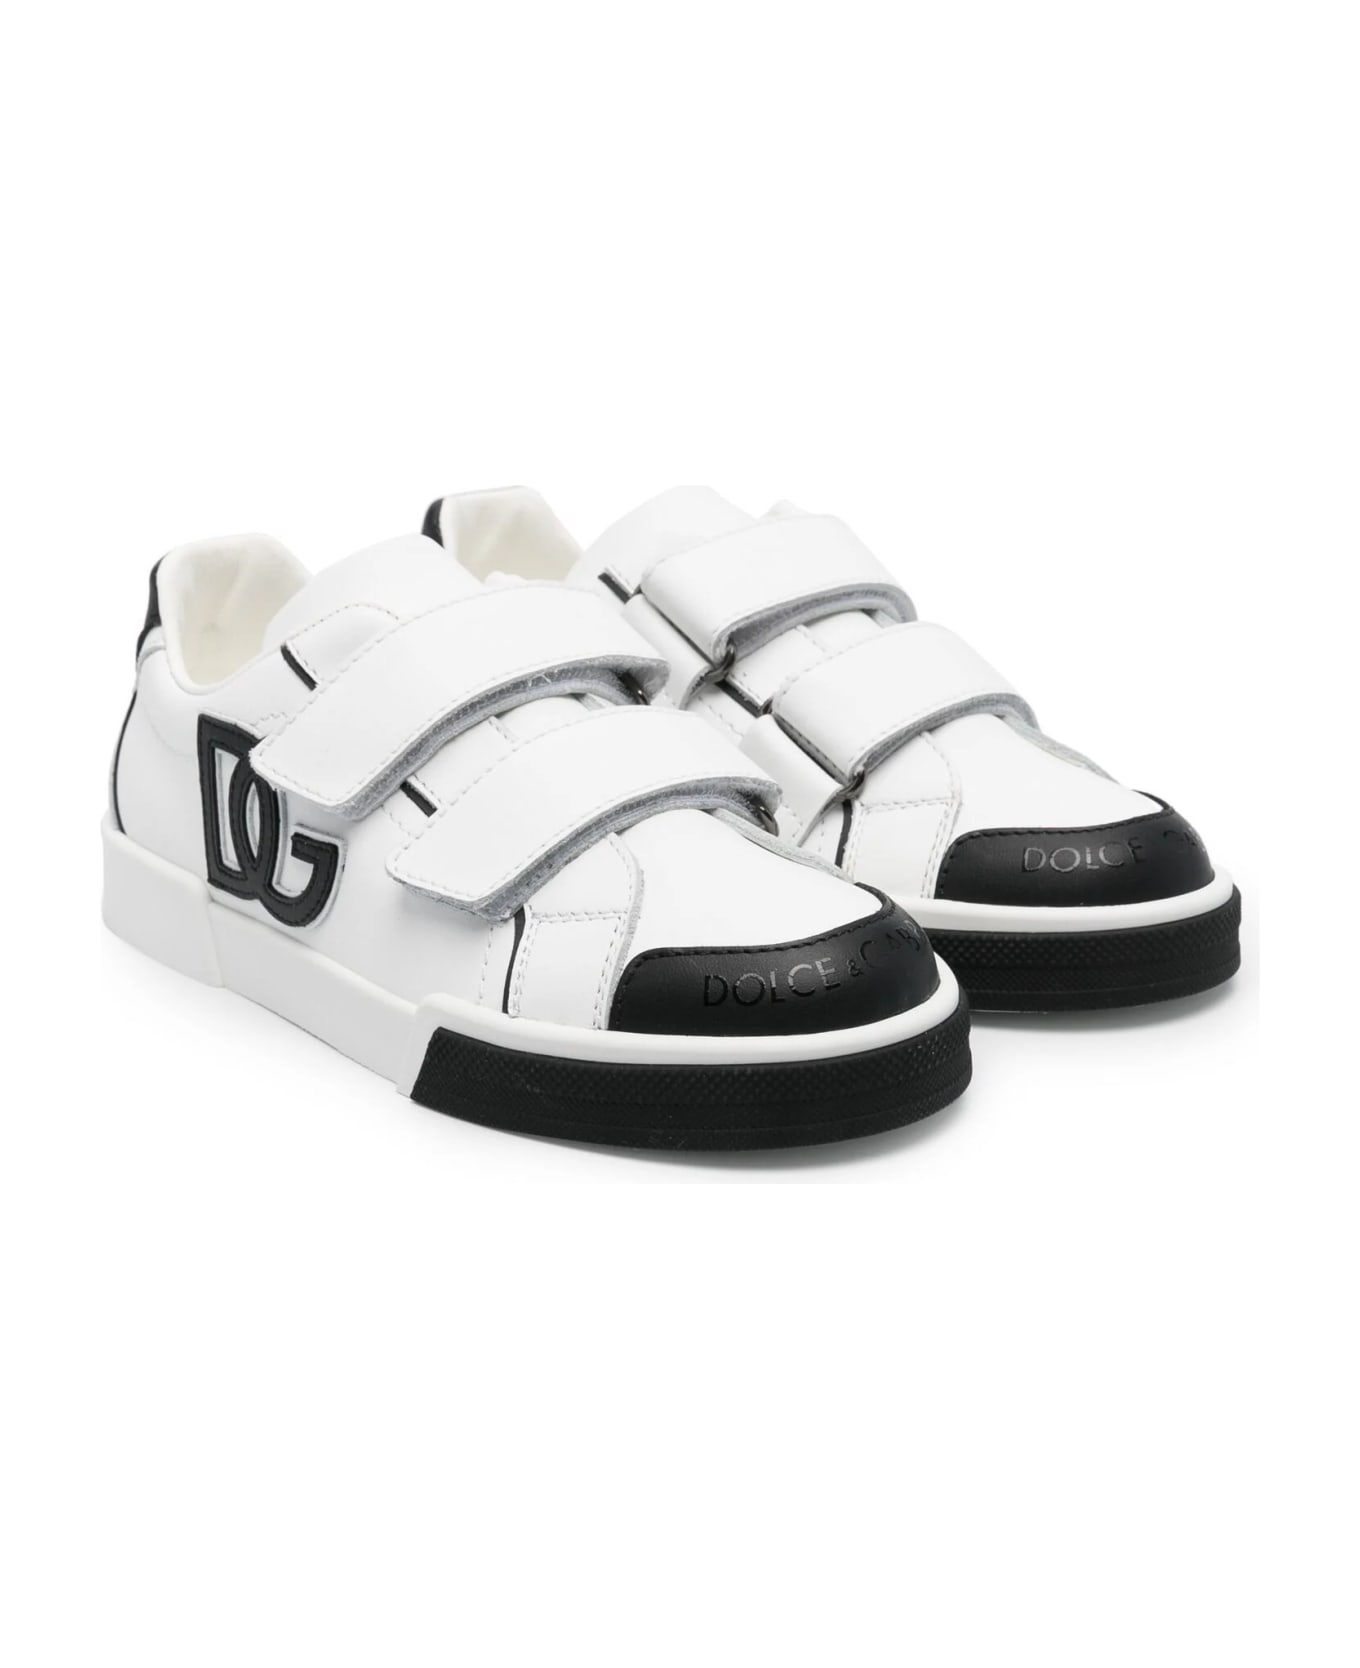 Dolce & Gabbana White And Black Sneakers With Dg Logo - Bianco